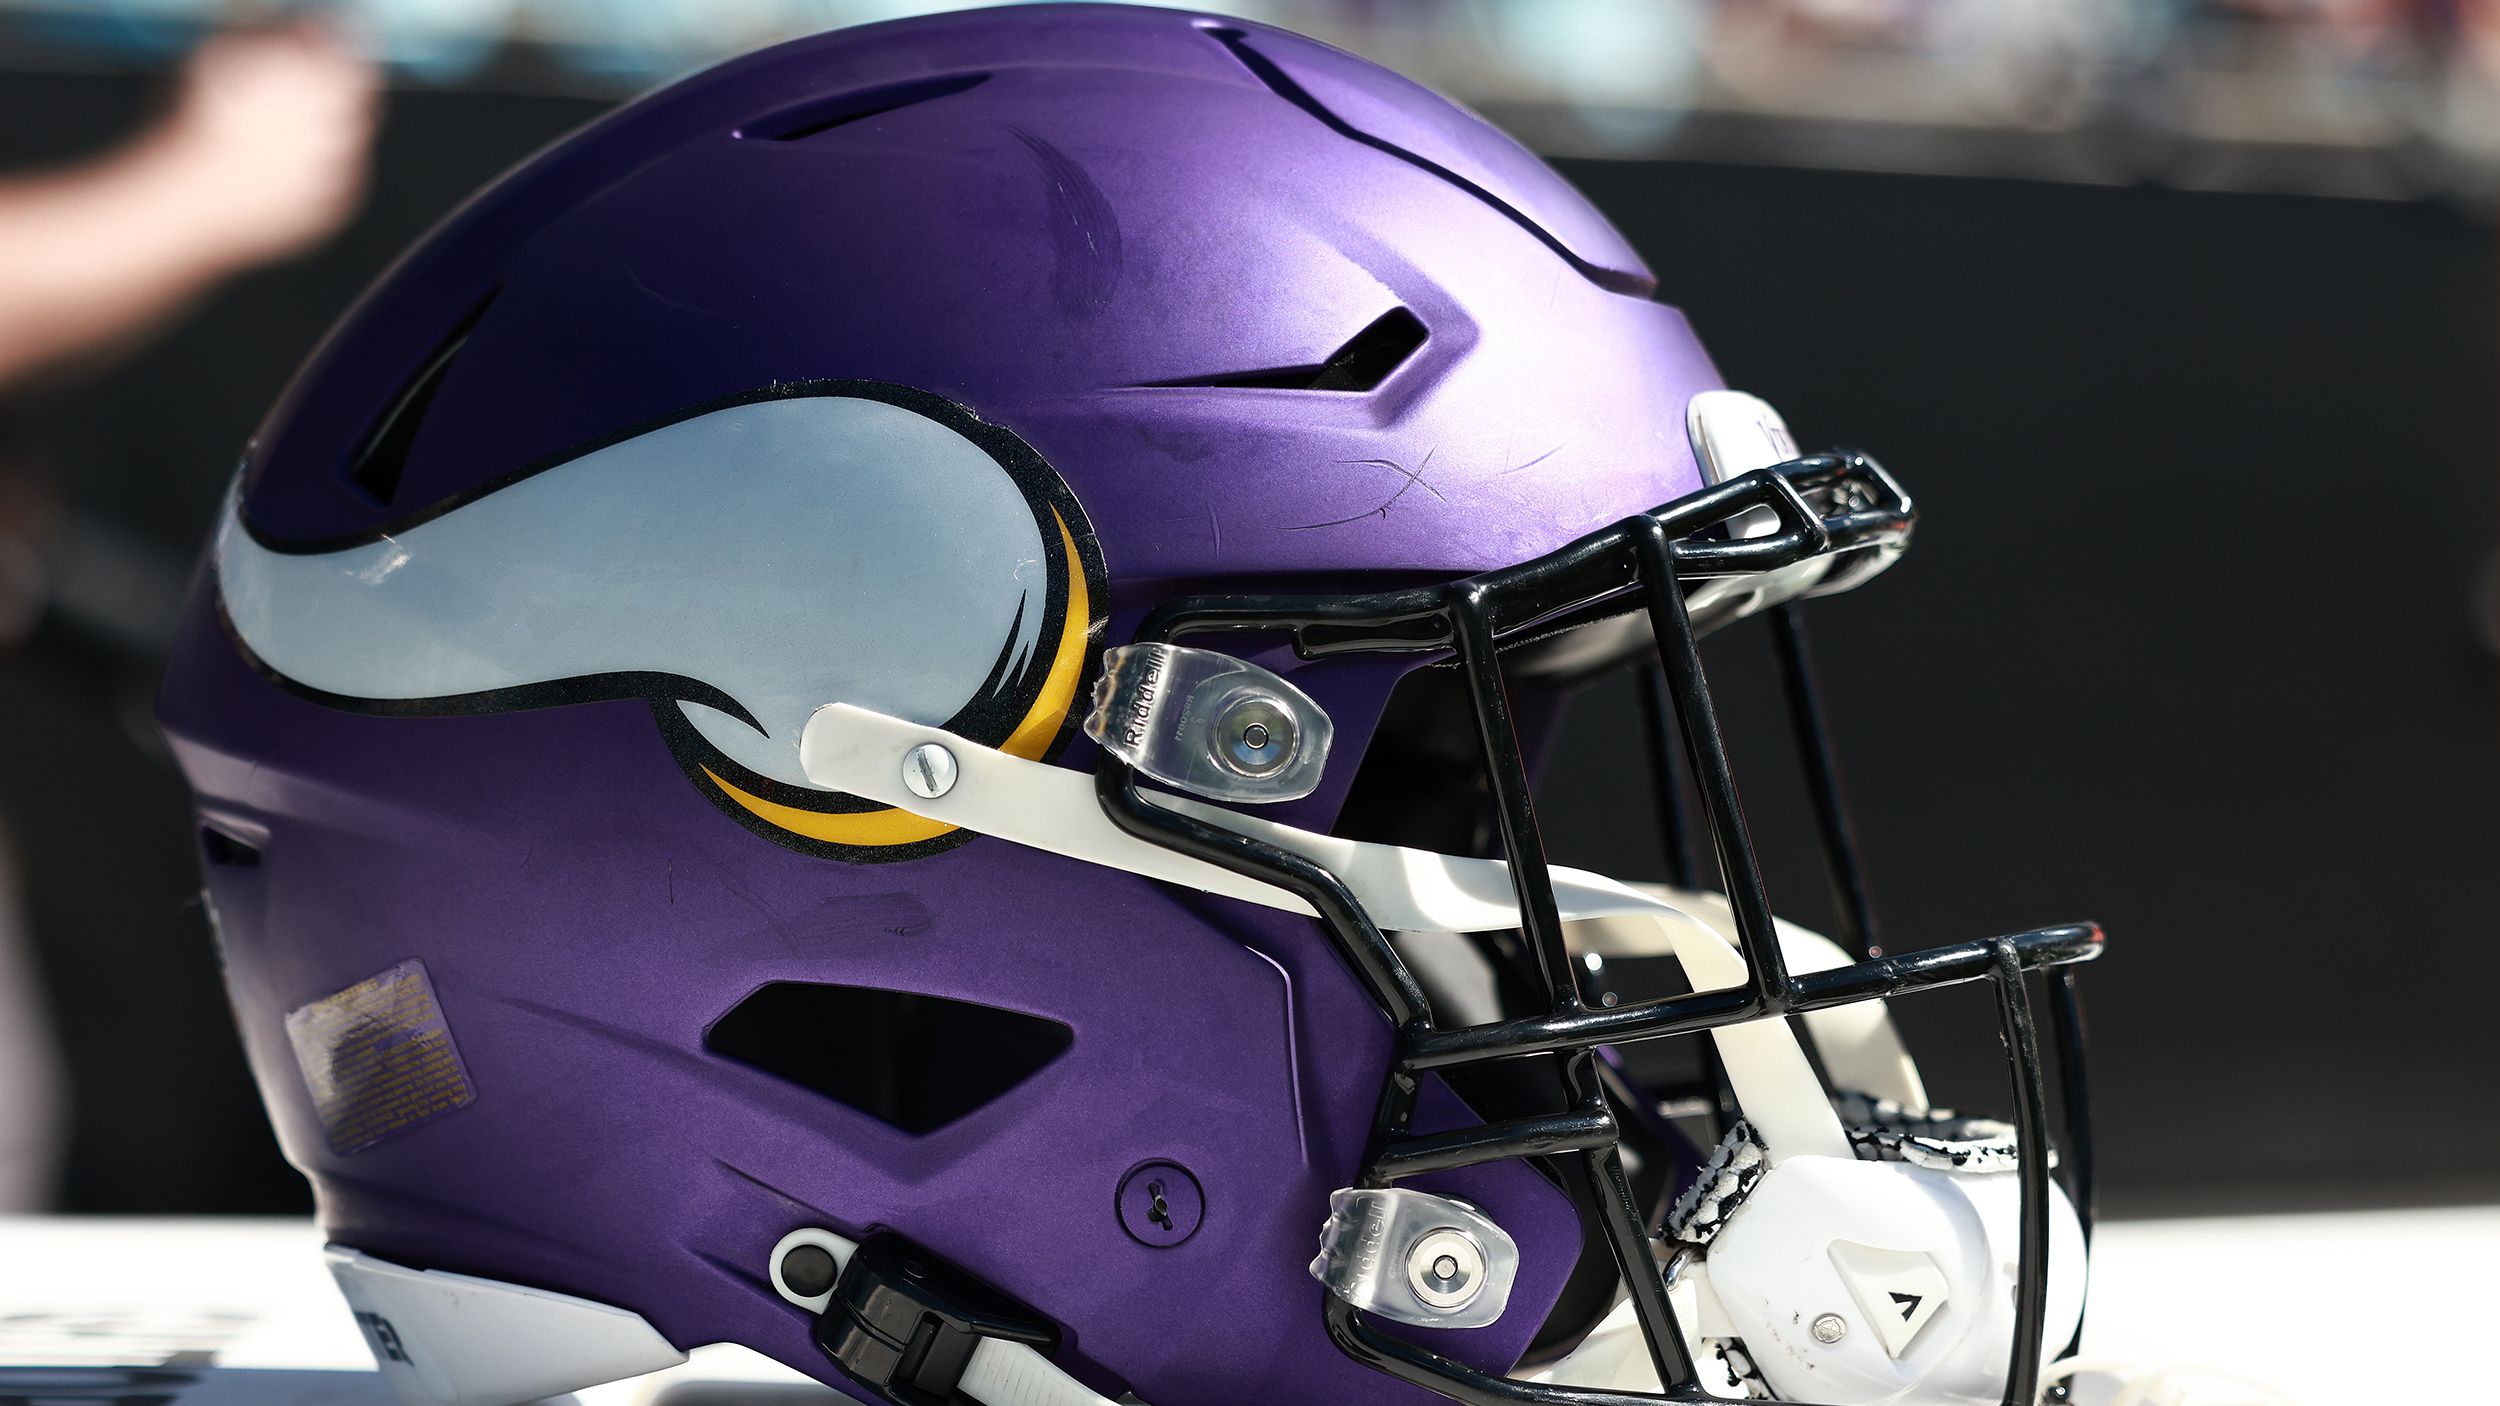 A vaccinated Minnesota Vikings player was admitted to an ER for Covid-19, head coach says